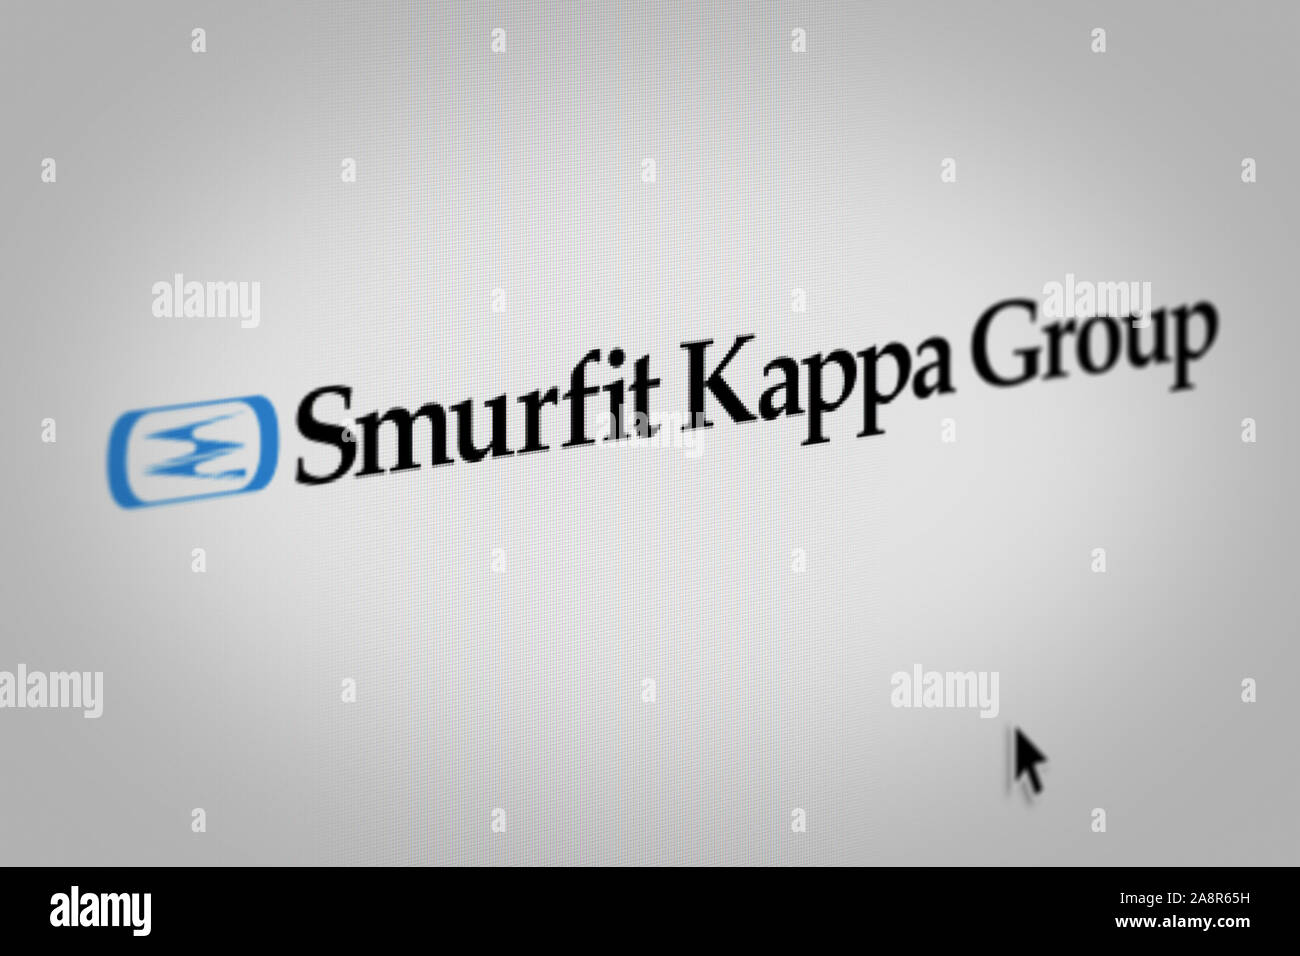 Logo of the public company Smurfit Kappa displayed on a computer screen in  close-up. Credit: PIXDUCE Stock Photo - Alamy